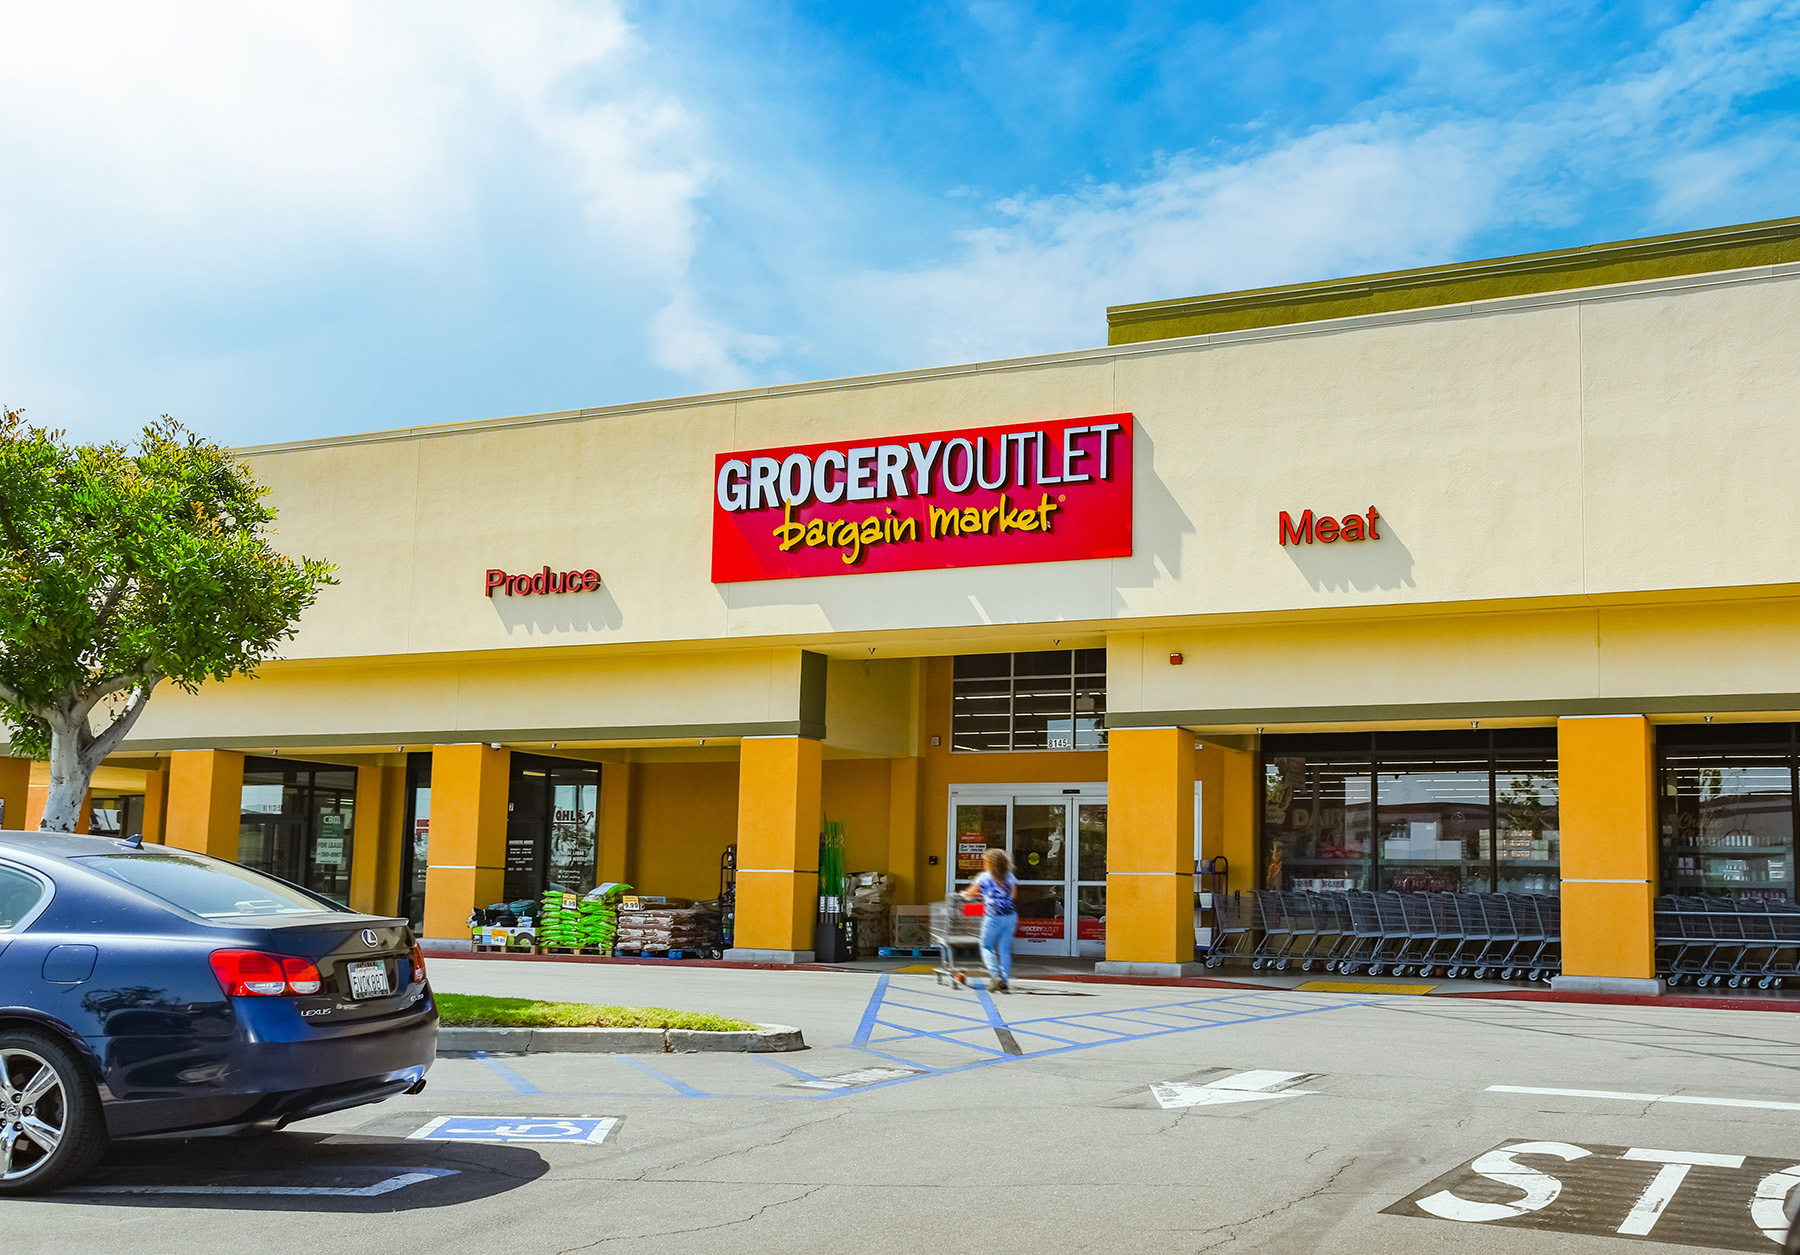 Hanley Investment Group Arranges Sale of 74,500 SF Grocery Outlet and Dollar Tree-Anchored Shopping Center in Long Beach, Calif. for $21,250,000